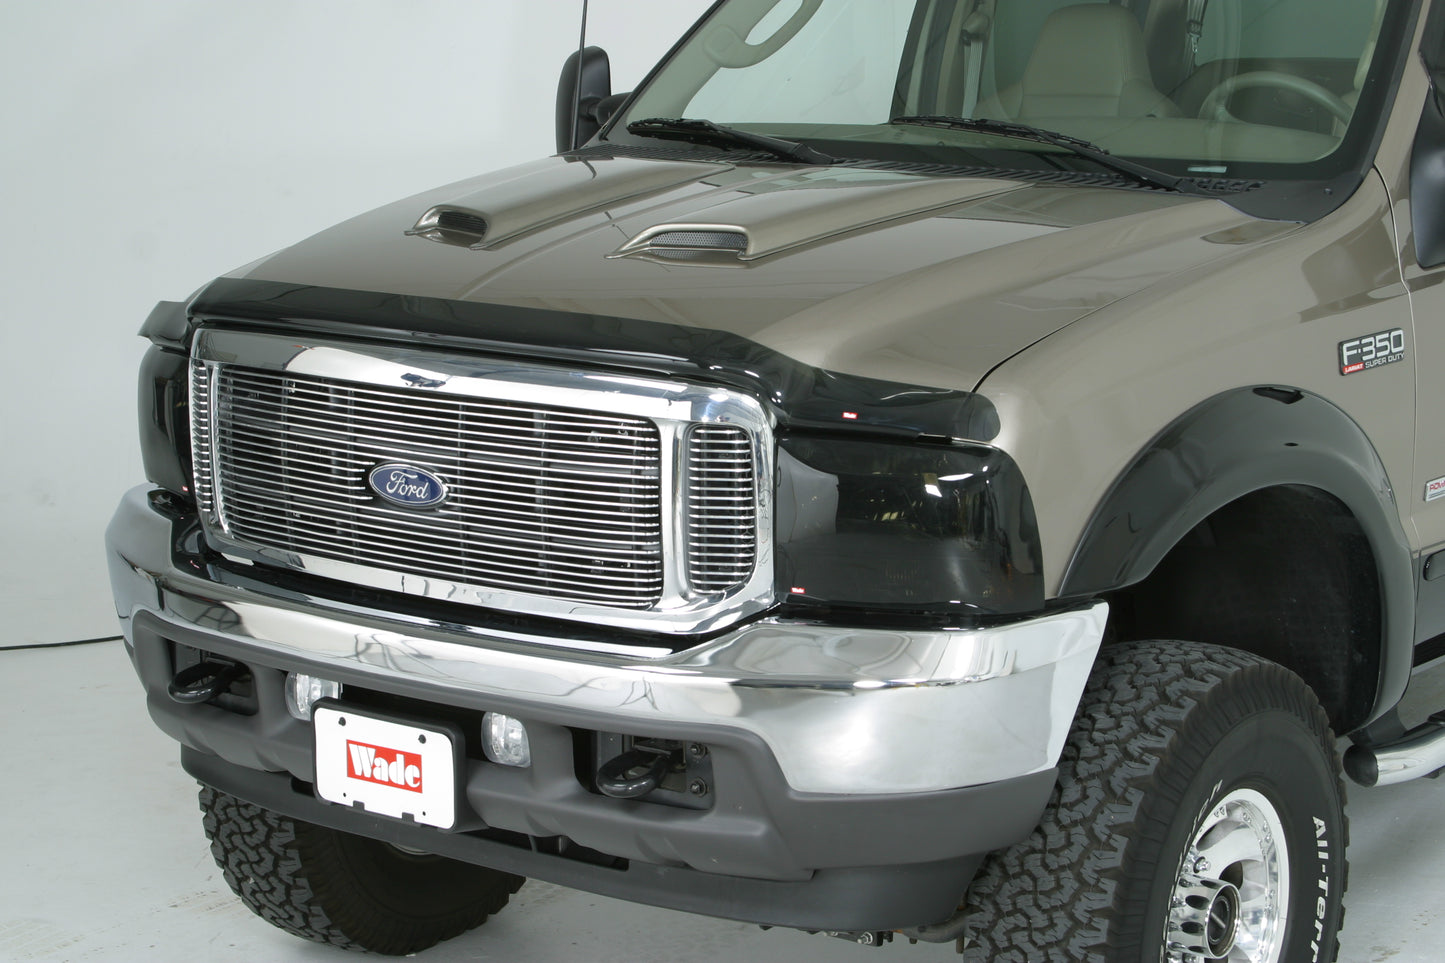 1996 Ford F-Series Head Light Covers